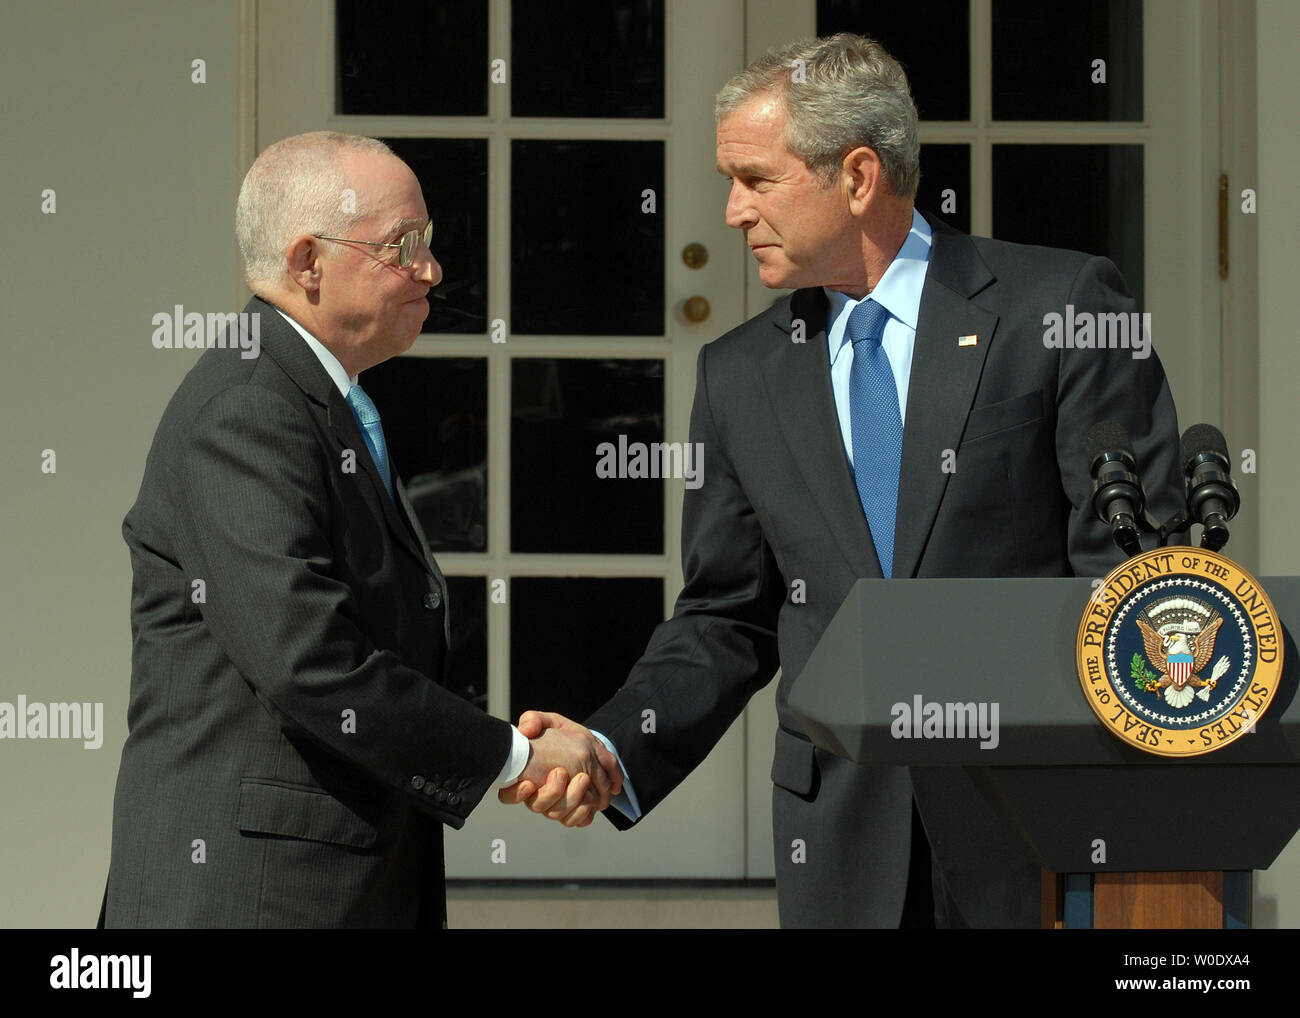 U.S. President George W. Bush (R) shakes hands with Michael B. Mukasey, a retired federal judge from New York, whom Bush nominated to replace Alberto Gonzales as attorney general in the Rose Garden of the White House on September 17, 2007.   (UPI Photo/Roger L. Wollenberg) Stock Photo